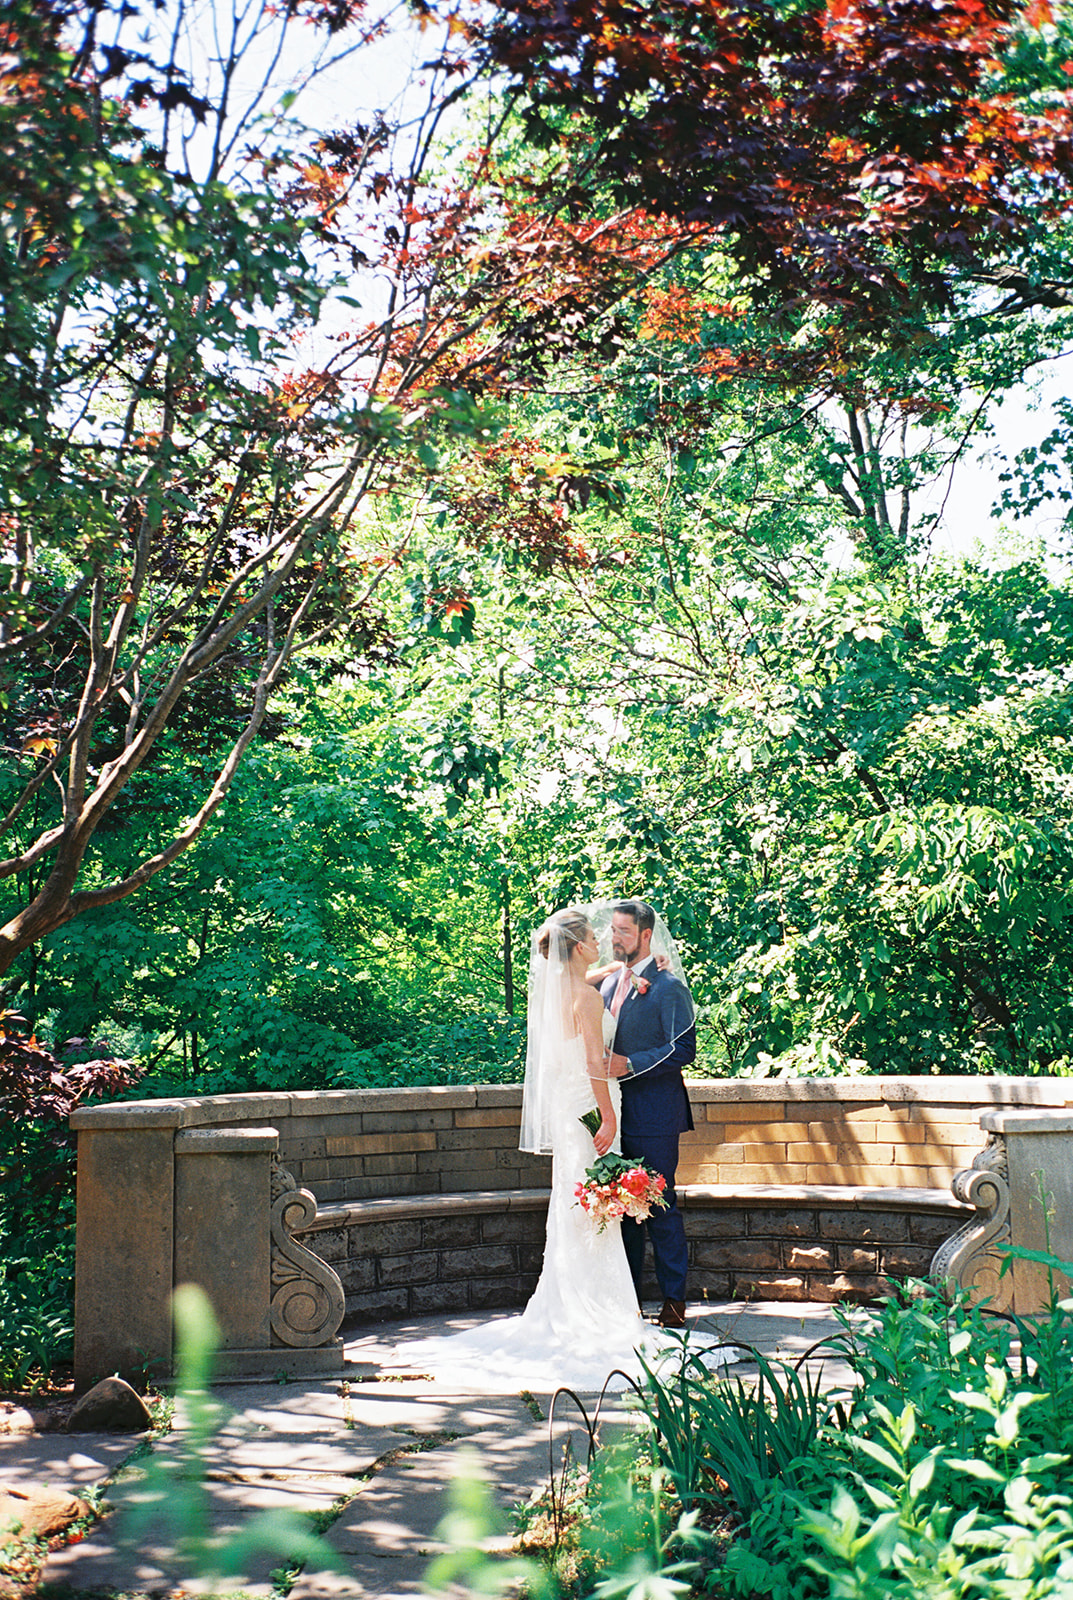 Colorful June garden wedding at Newfields